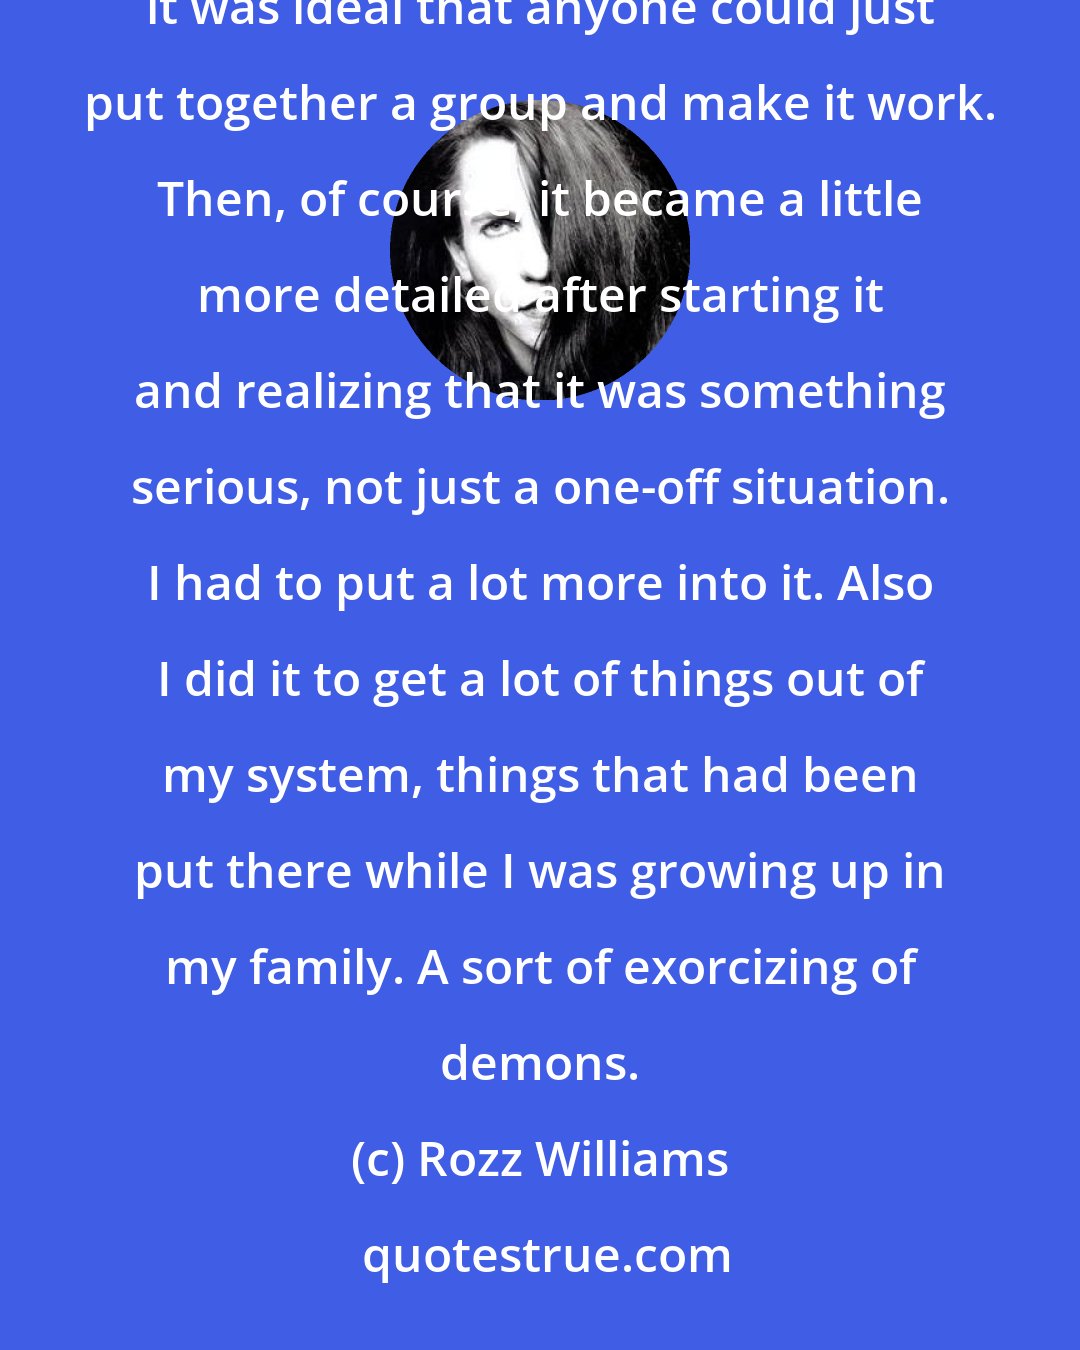 Rozz Williams: I was always interested in music, I felt it was time to do it, coming out of the punk scene [1979]. I thought it was ideal that anyone could just put together a group and make it work. Then, of course, it became a little more detailed after starting it and realizing that it was something serious, not just a one-off situation. I had to put a lot more into it. Also I did it to get a lot of things out of my system, things that had been put there while I was growing up in my family. A sort of exorcizing of demons.